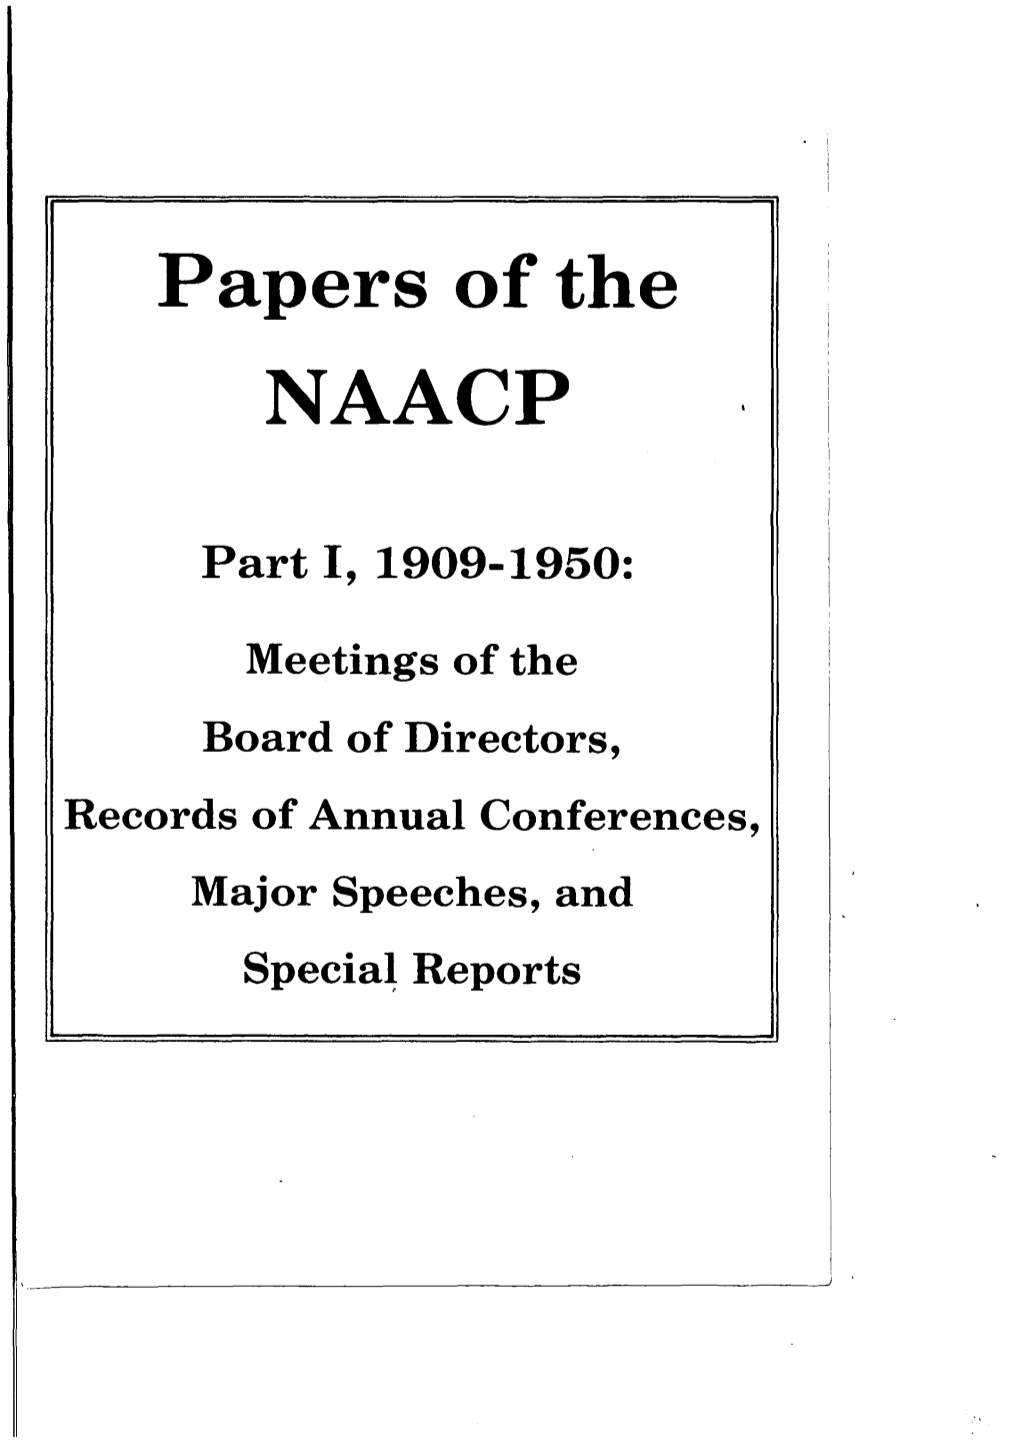 Papers of the NAACP